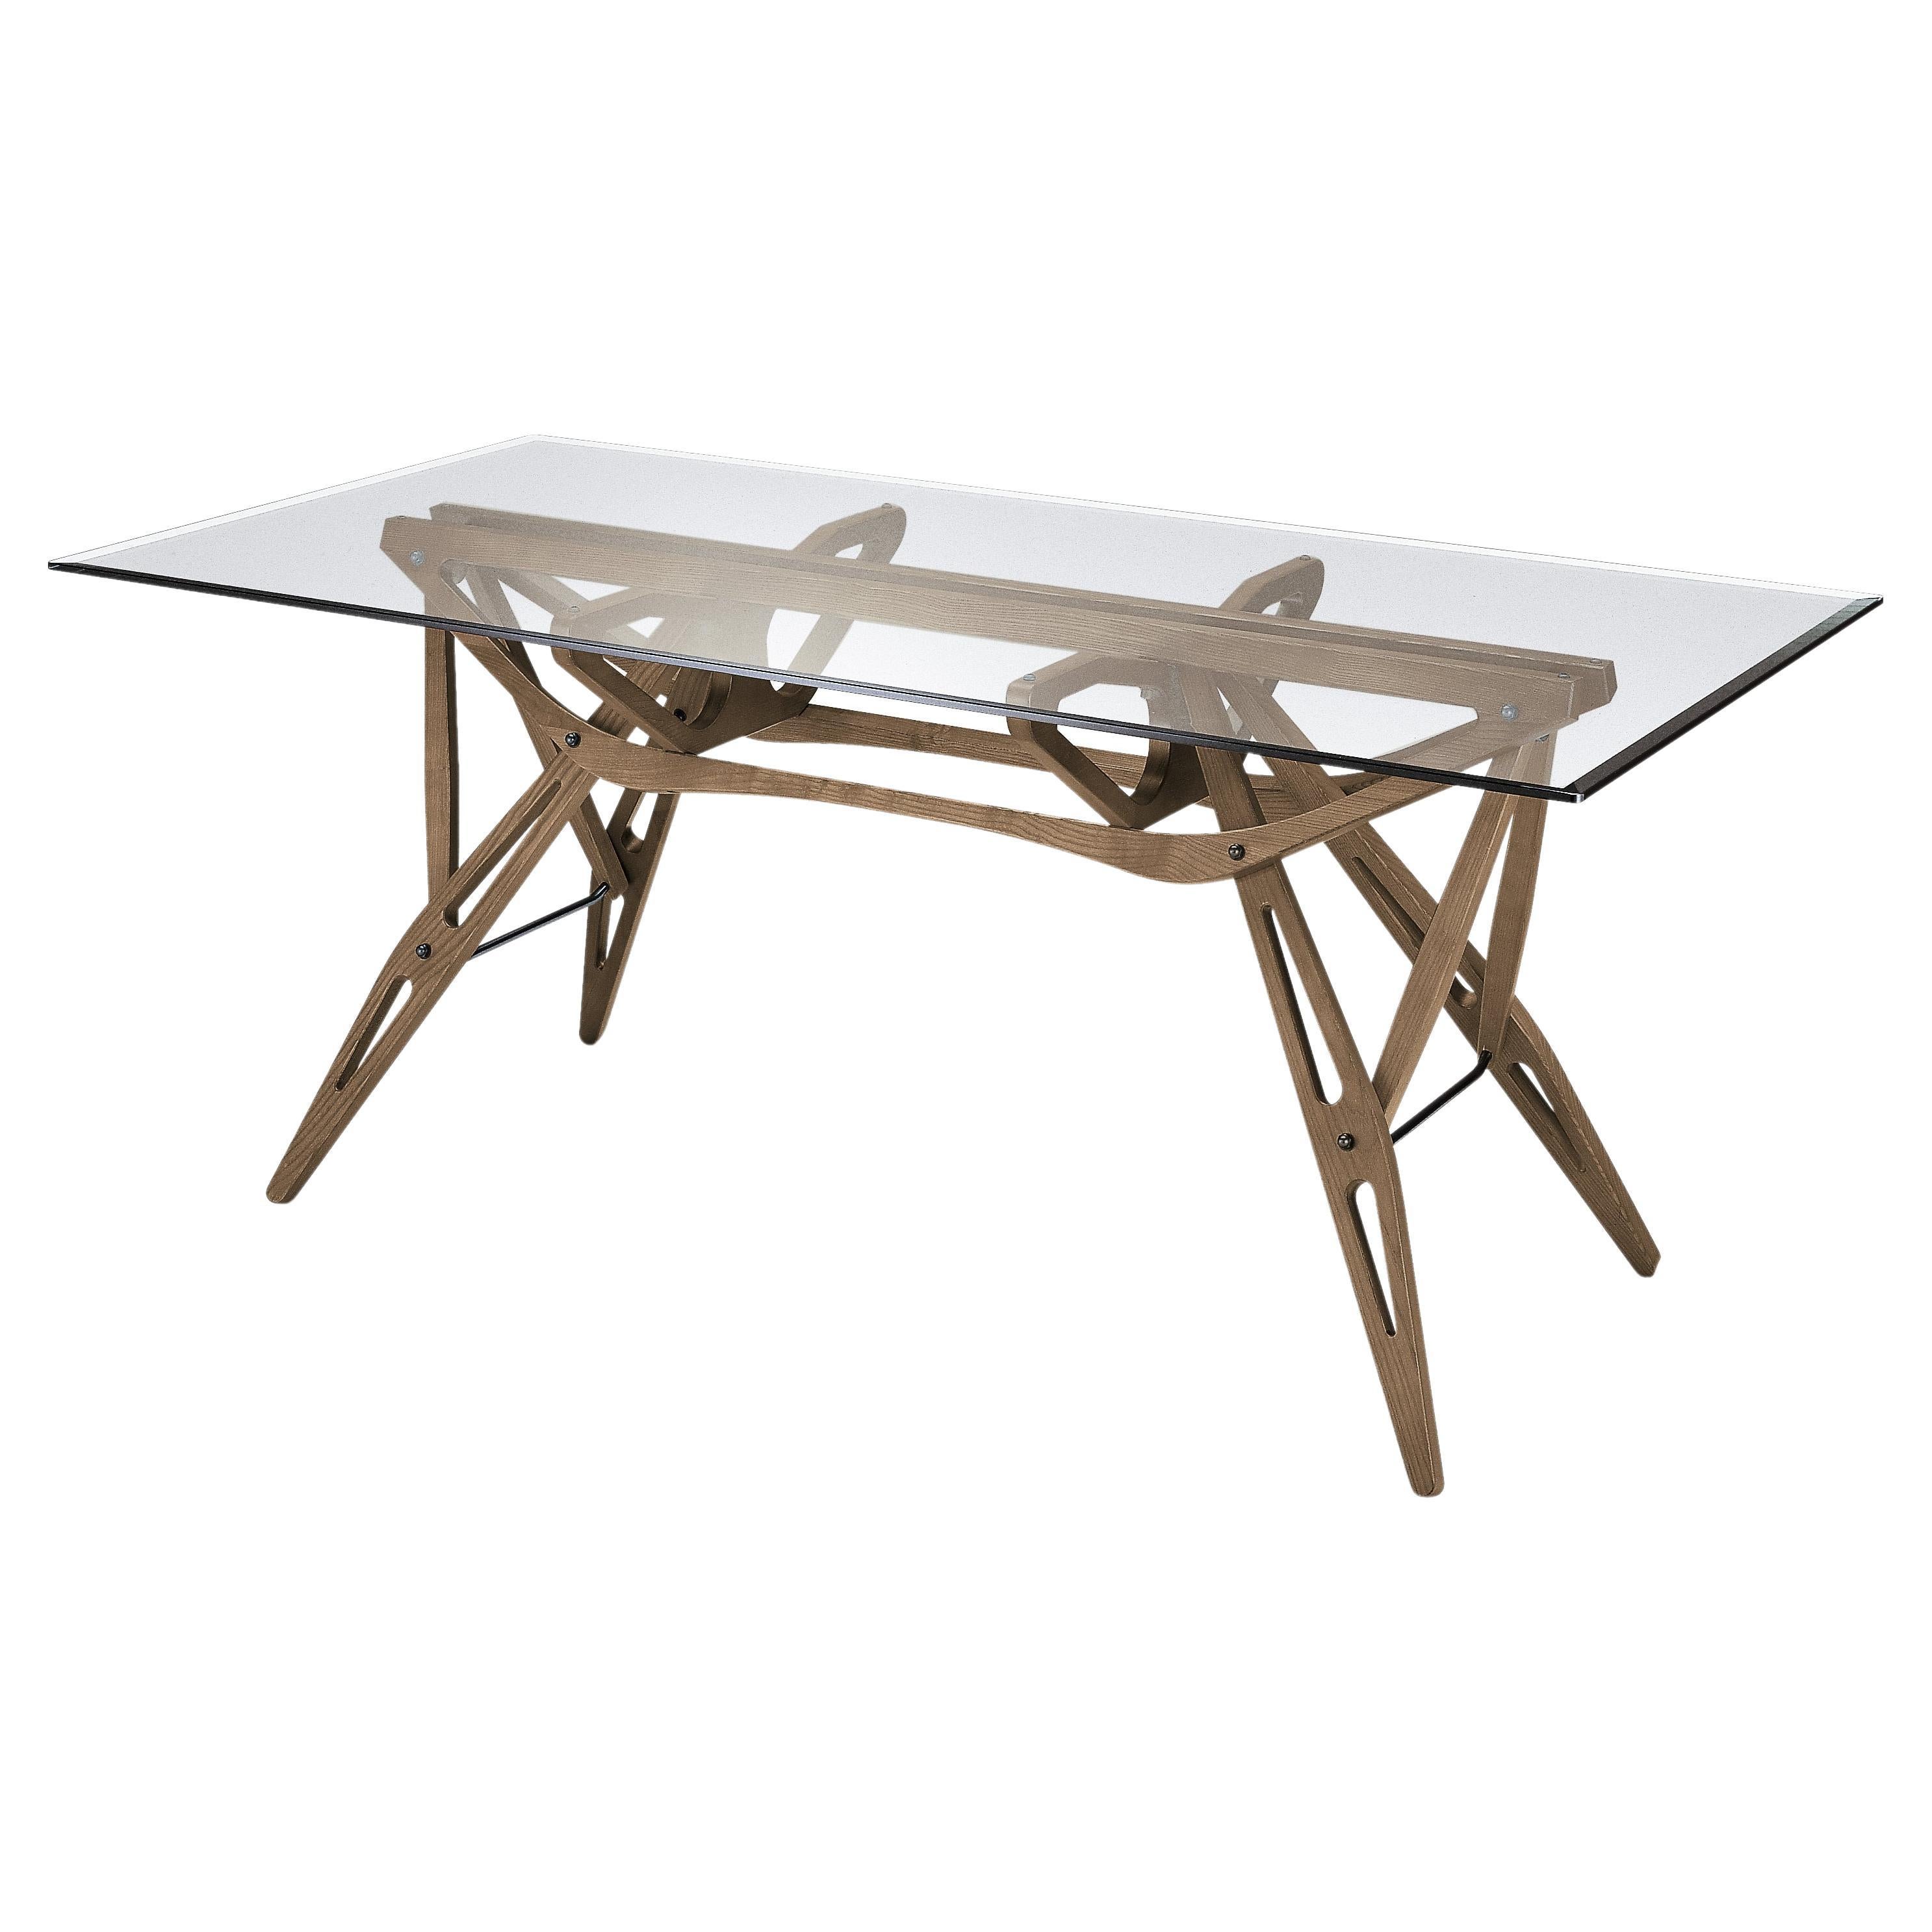 Zanotta Medium Reale Table in Glass Top with Bevelled Edge with Walnut Frame